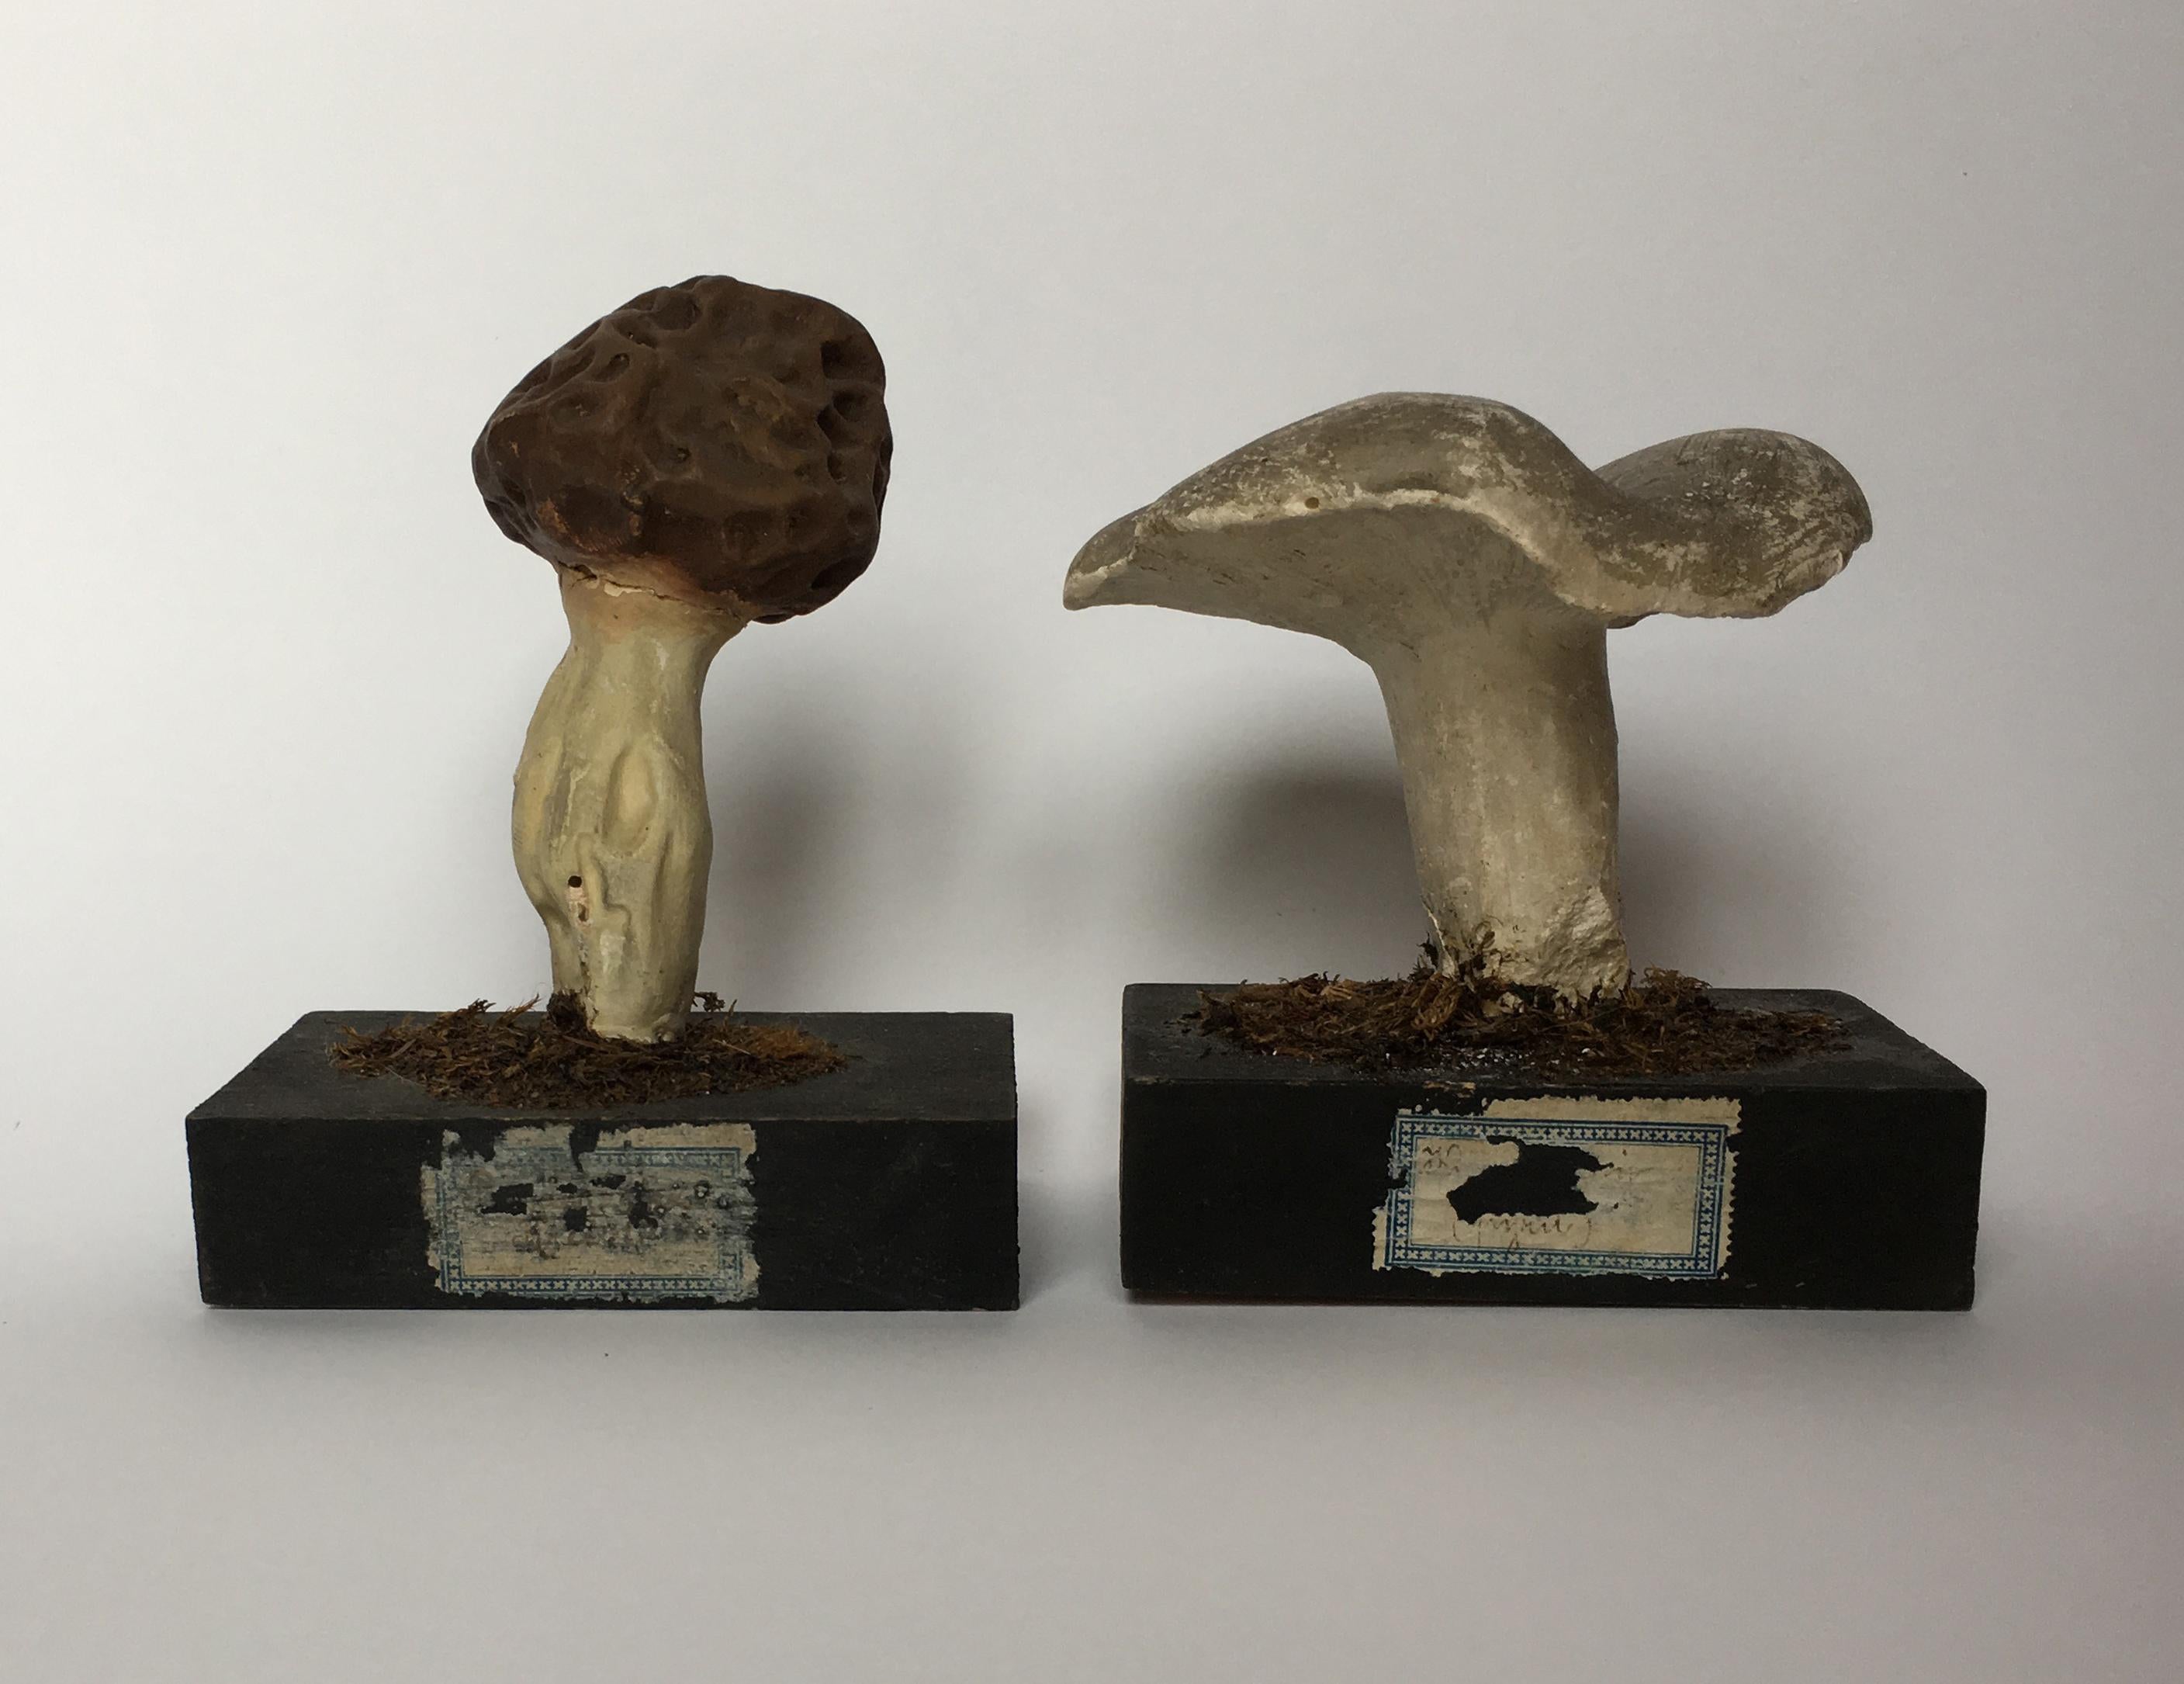 Early 20th Century 20th Century Wood and Painted Plaster Czech Mushroom Botanical Models circa 1920